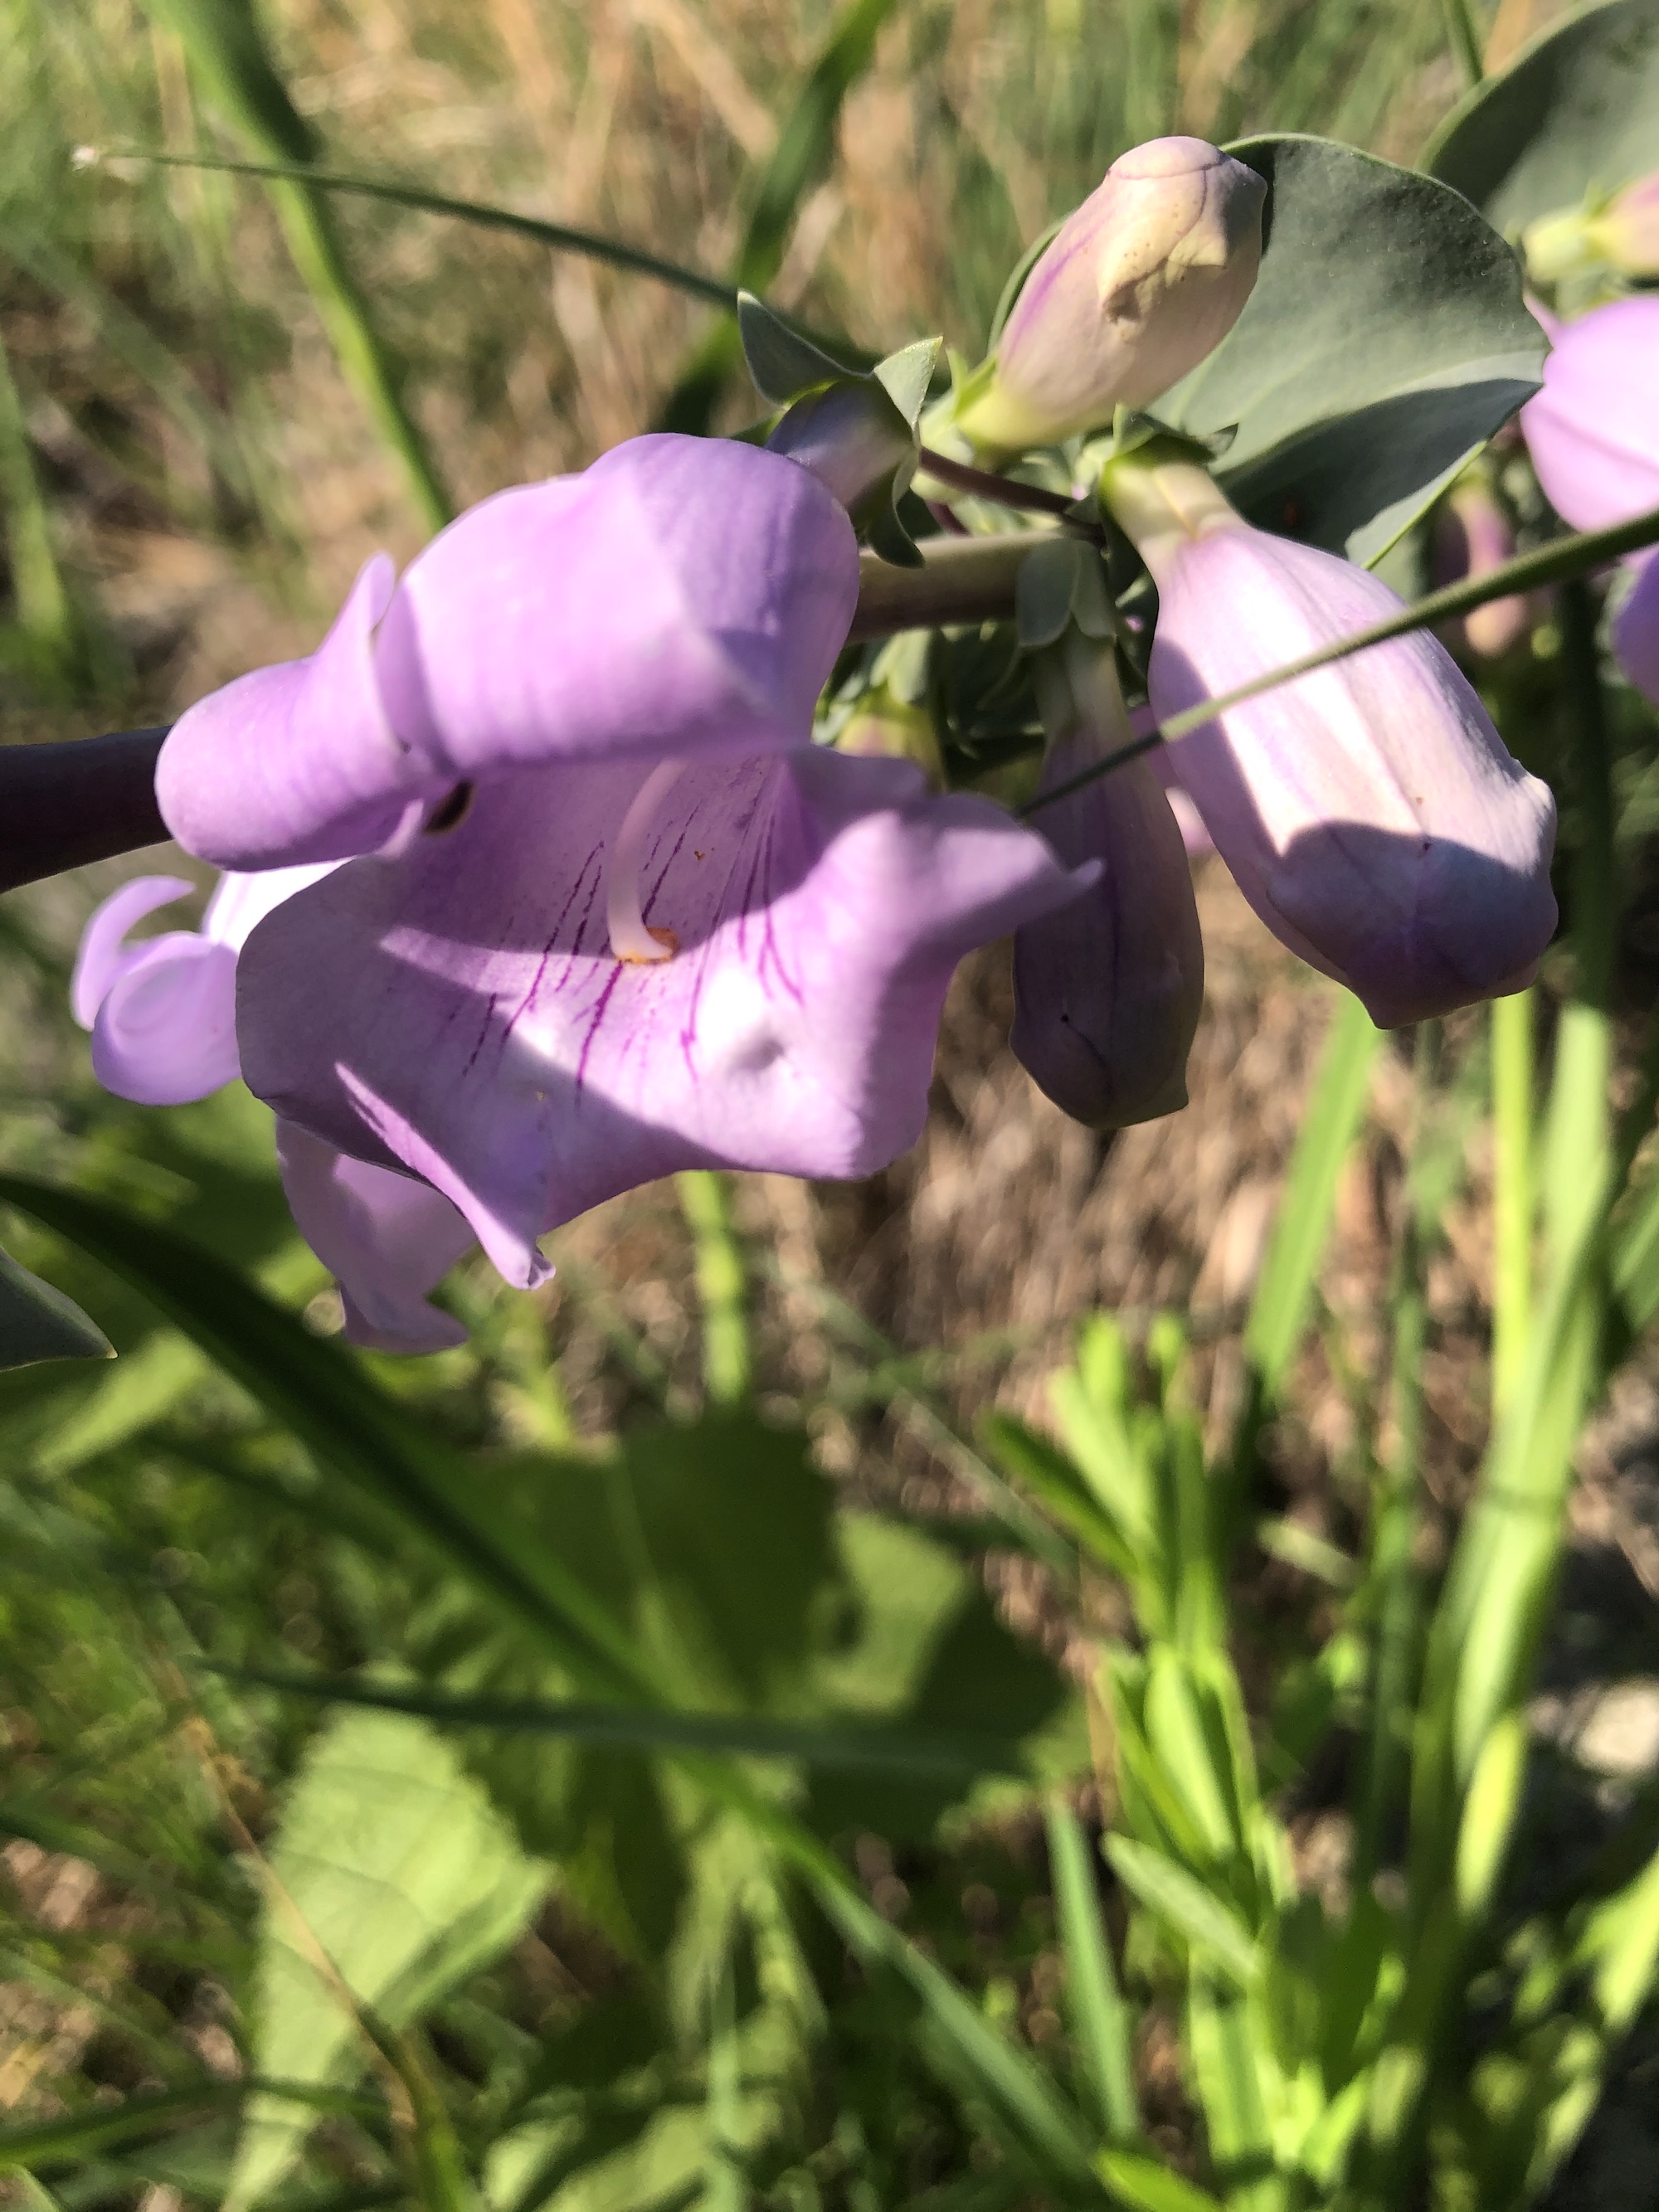 Large Beardtongue in the UW-Madison Arboretum in Madison, Wisconsin on May 26, 2021.